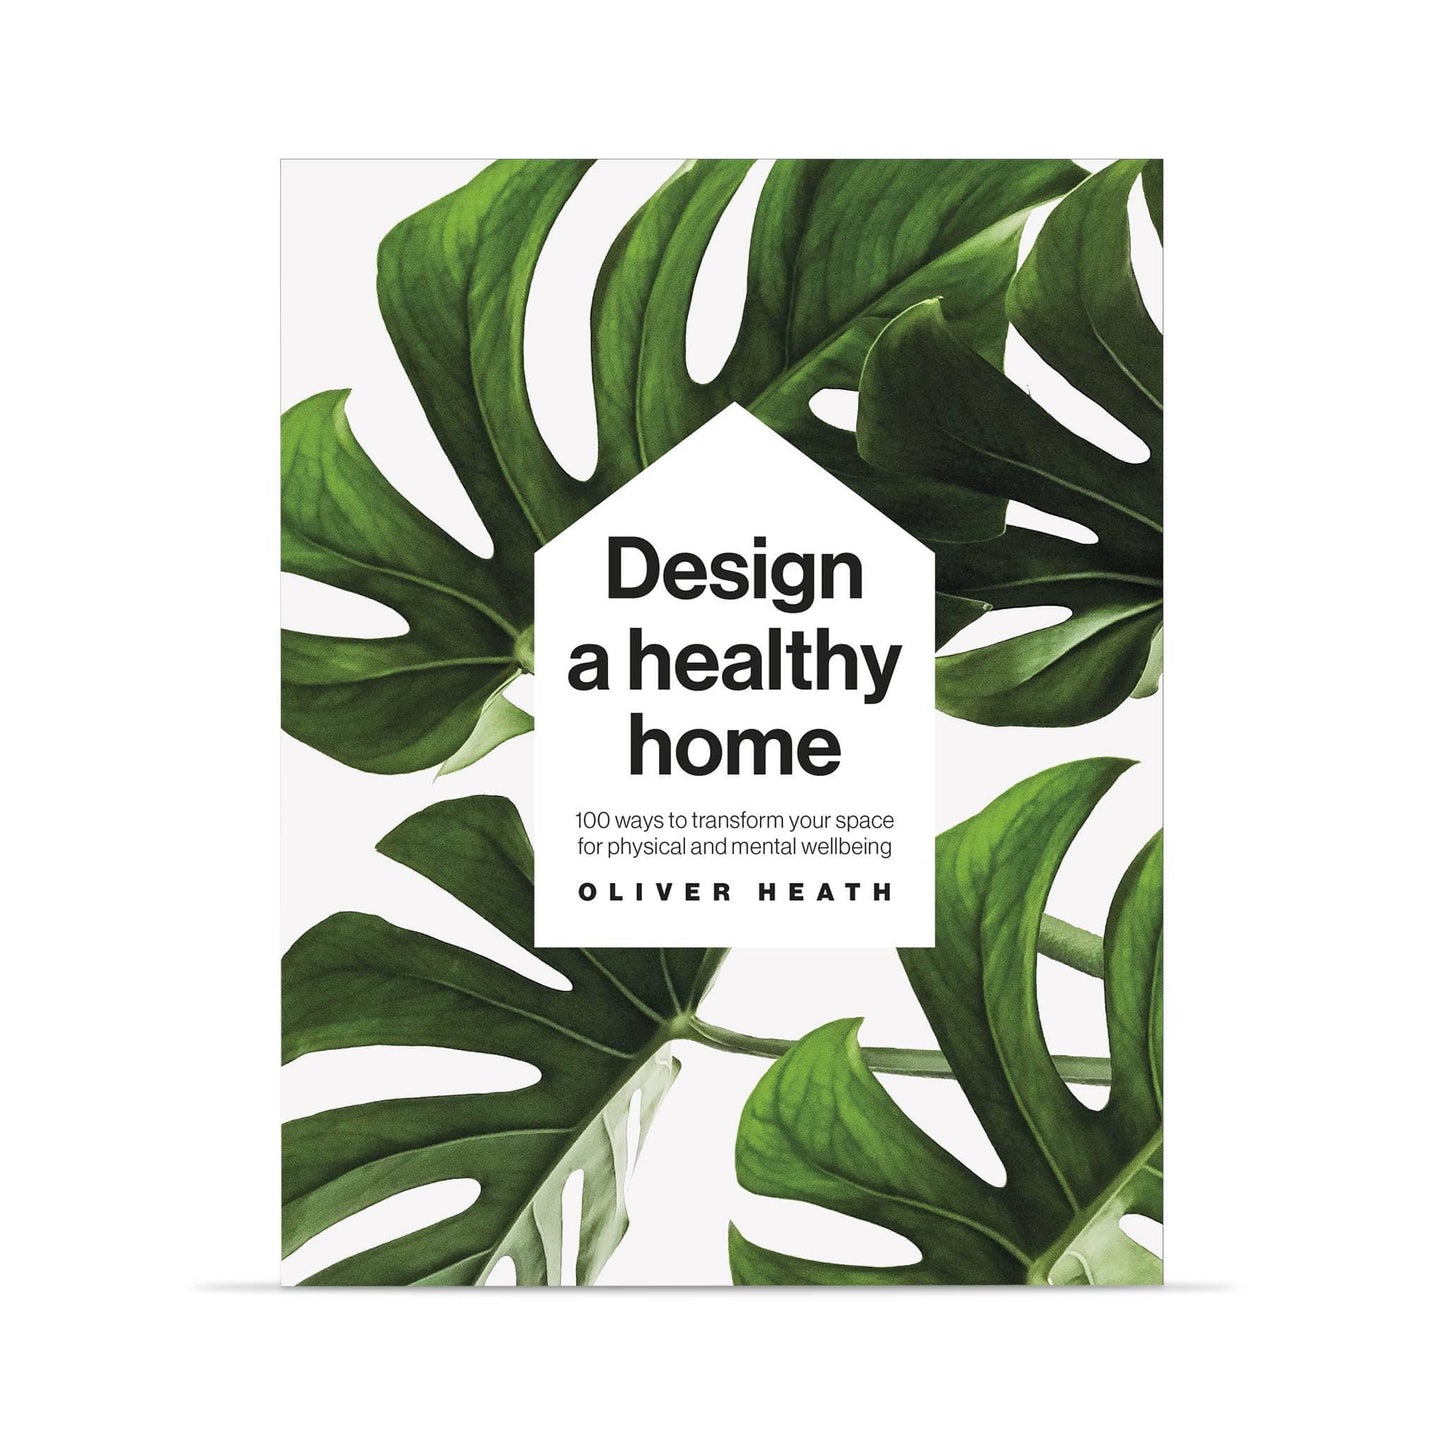 Load image into Gallery viewer, Our Bookshelf Print Books Design a Healthy Home - 100 ways to transform your space for physical &amp;amp; mental wellbeing - Oliver Heath
